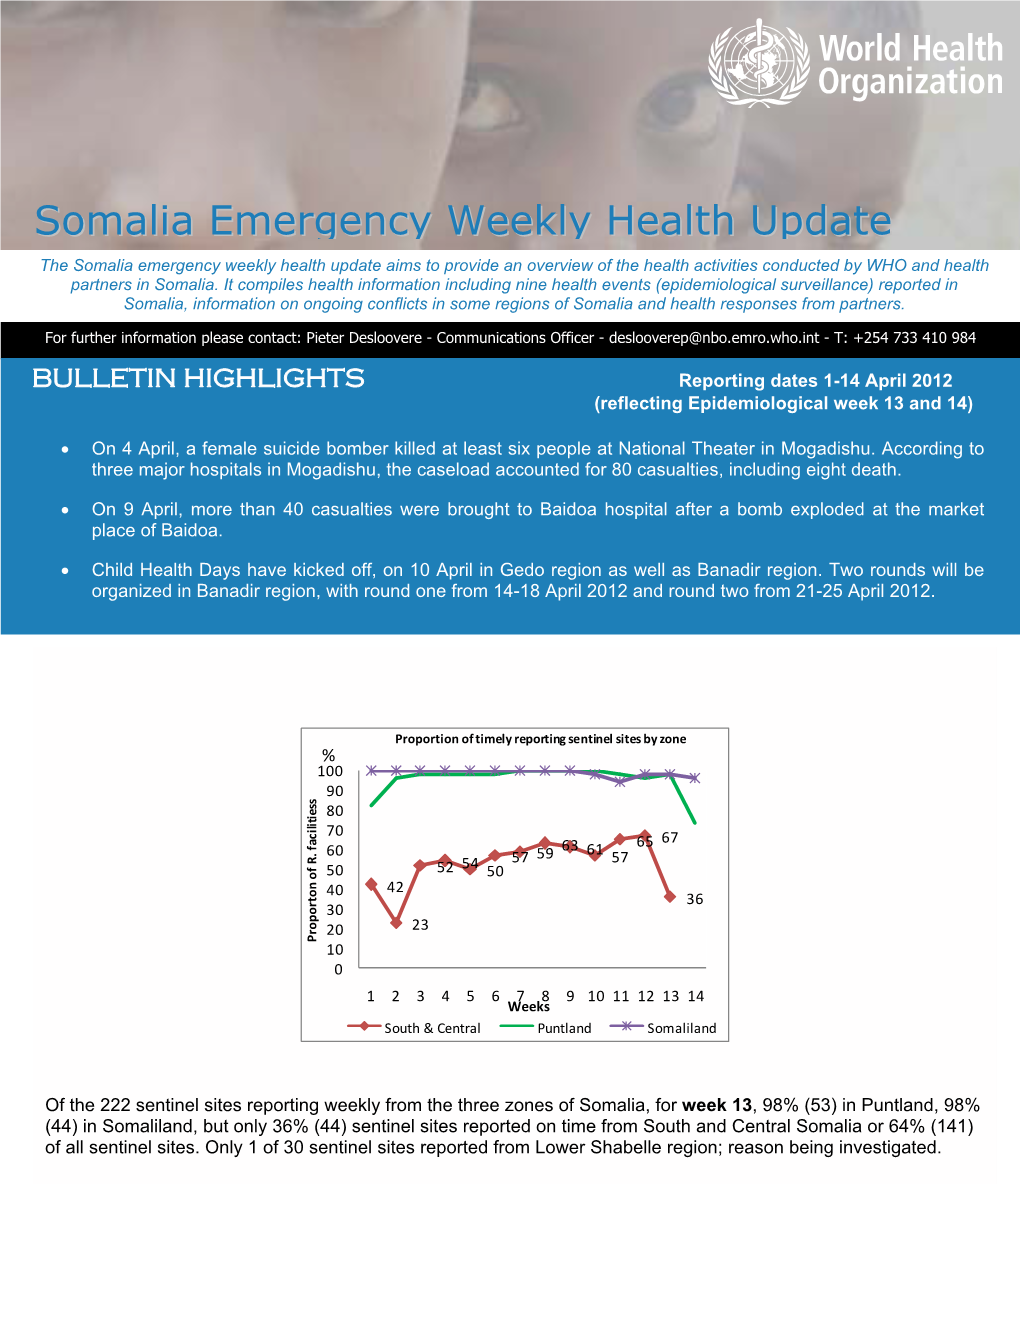 Somalia Emergency Weekly Health Update Aims to Provide an Overview of the Health Activities Conducted by WHO and Health Partners in Somalia